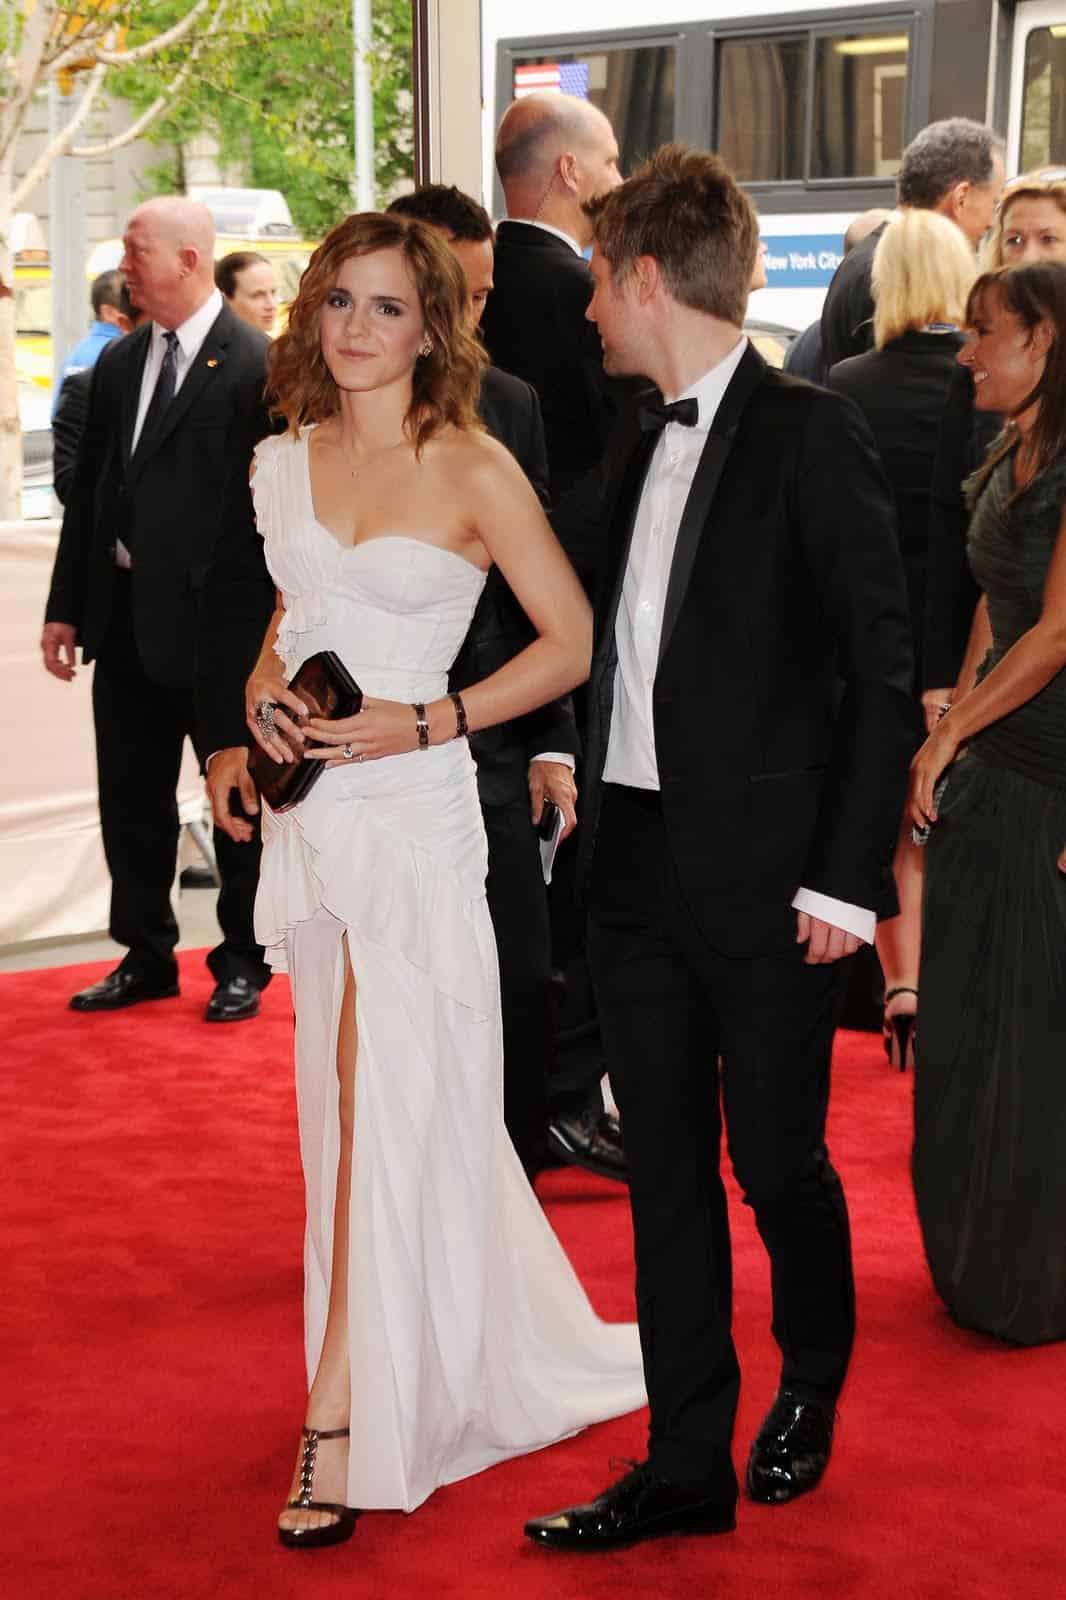 Emma Watson Wore a Stunning White One Shoulder Dress at the Met Gala in NY